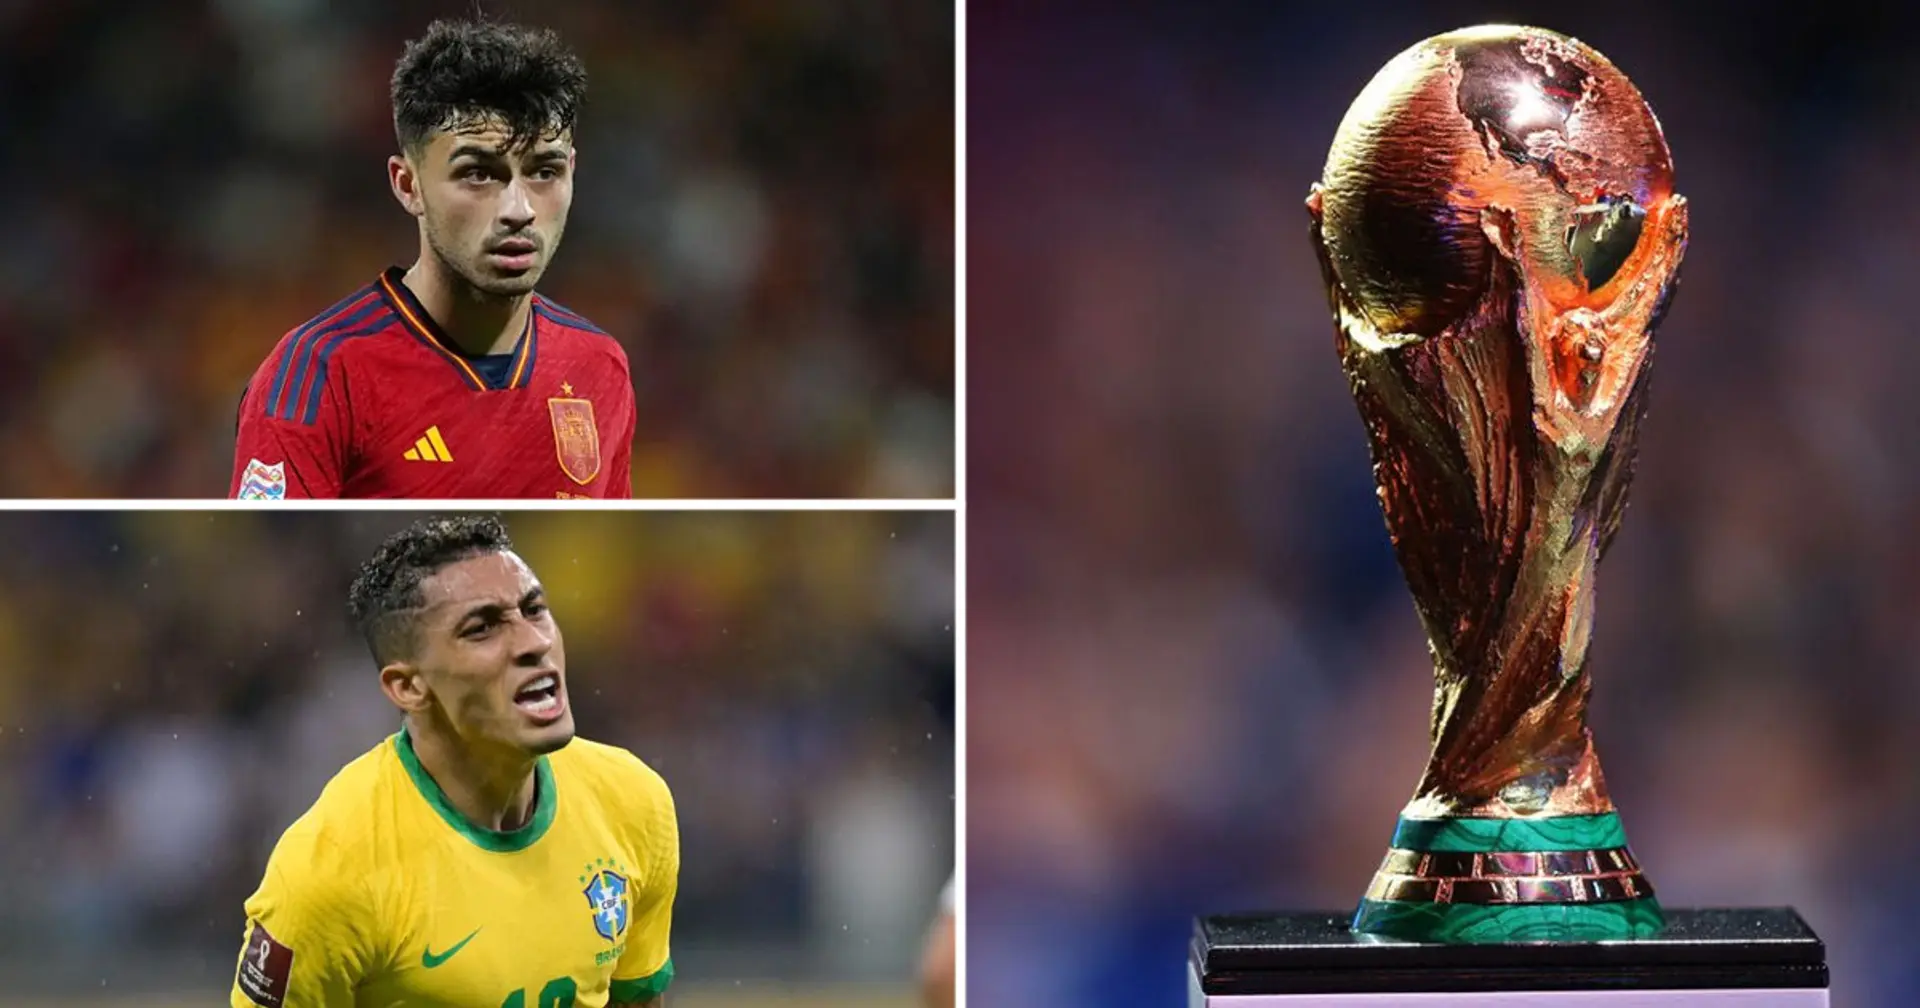 Do you think a Barca player will win the World Cup? Who, if yes?